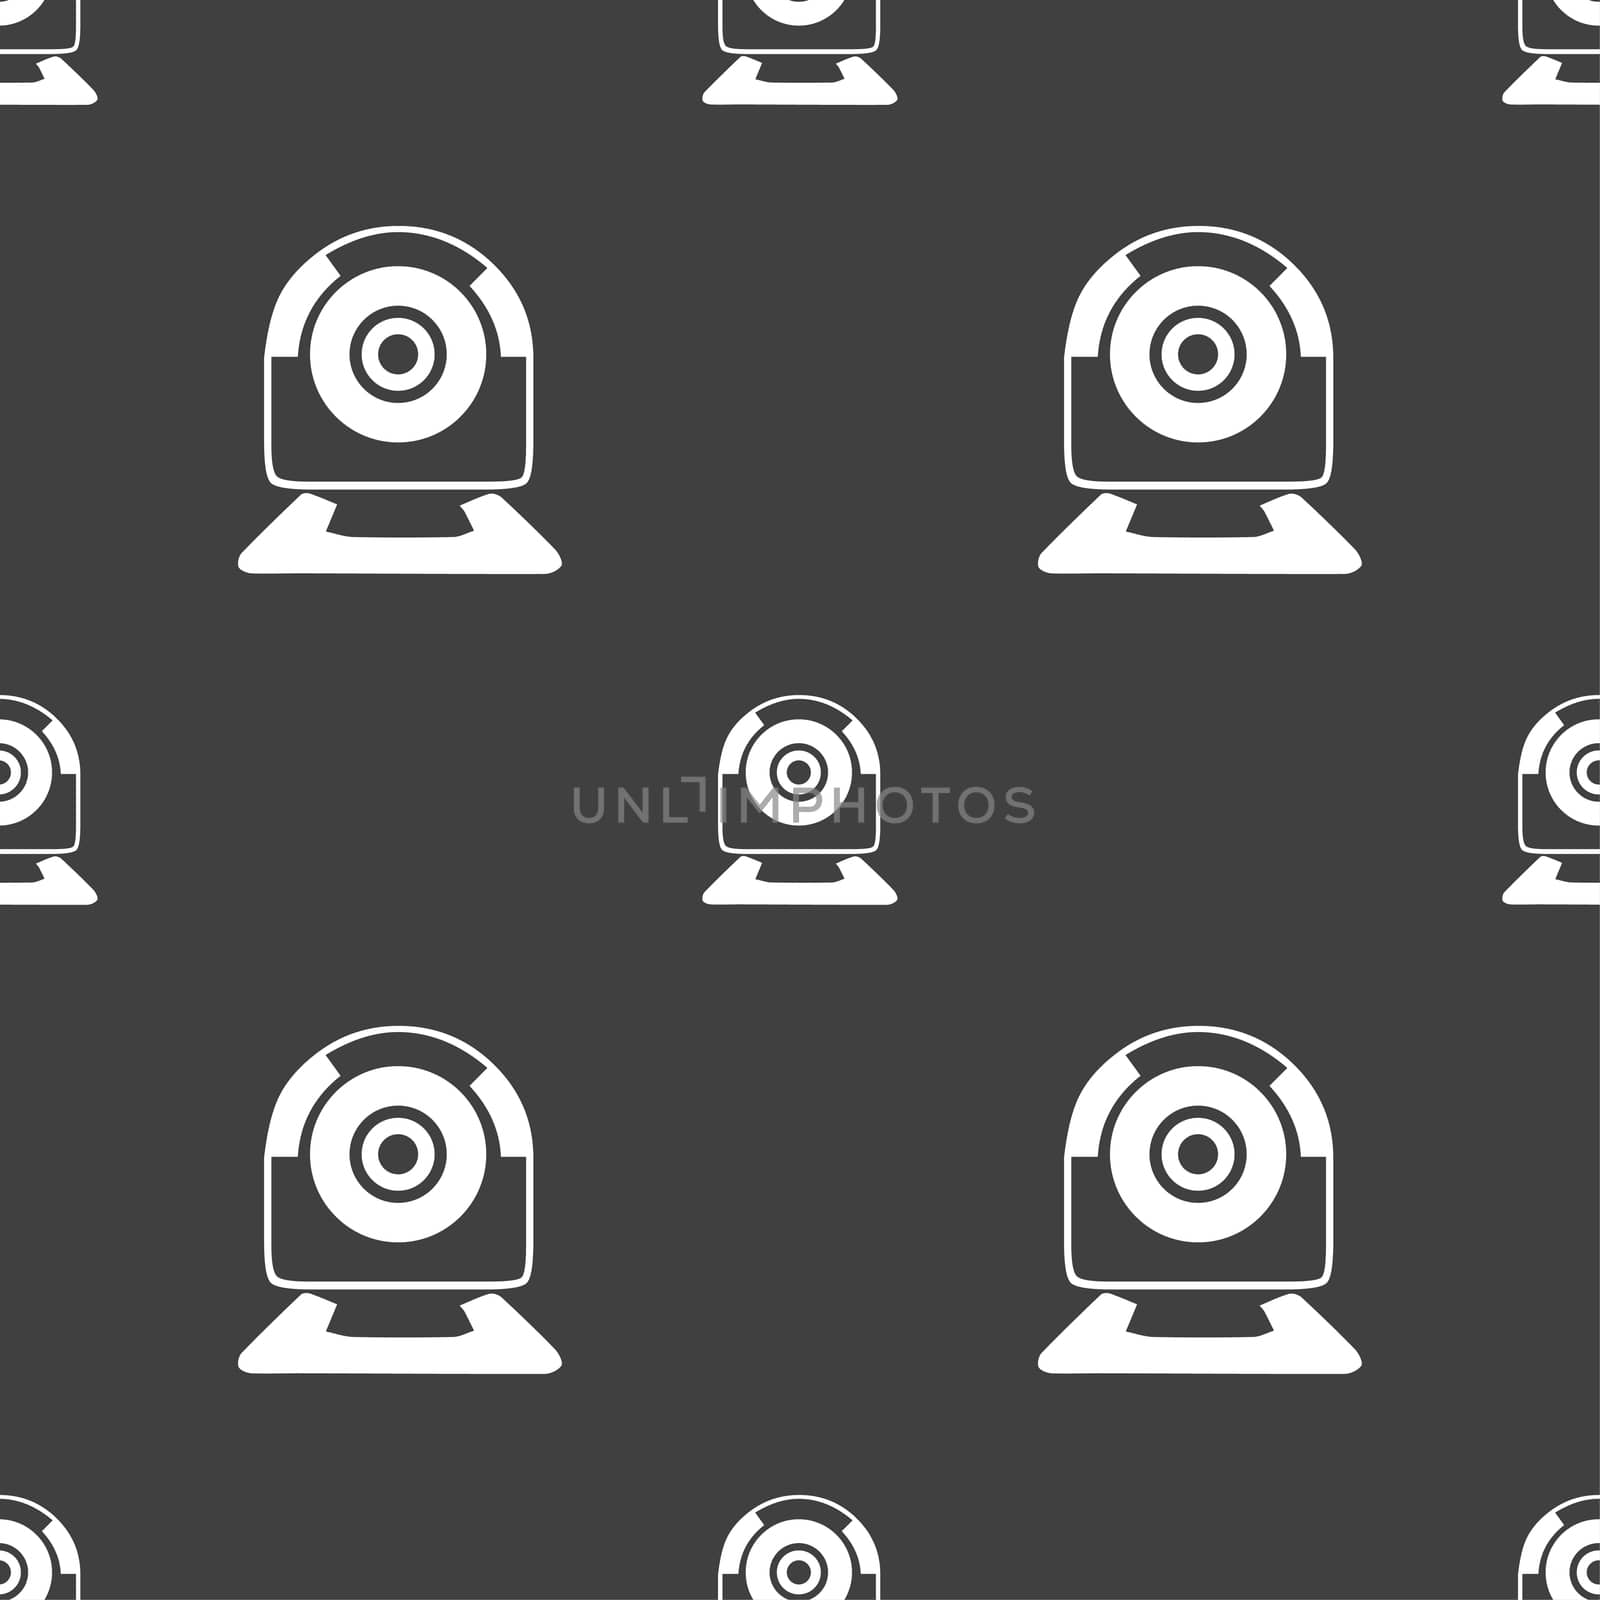 Webcam sign icon. Web video chat symbol. Camera chat. Seamless pattern on a gray background. illustration